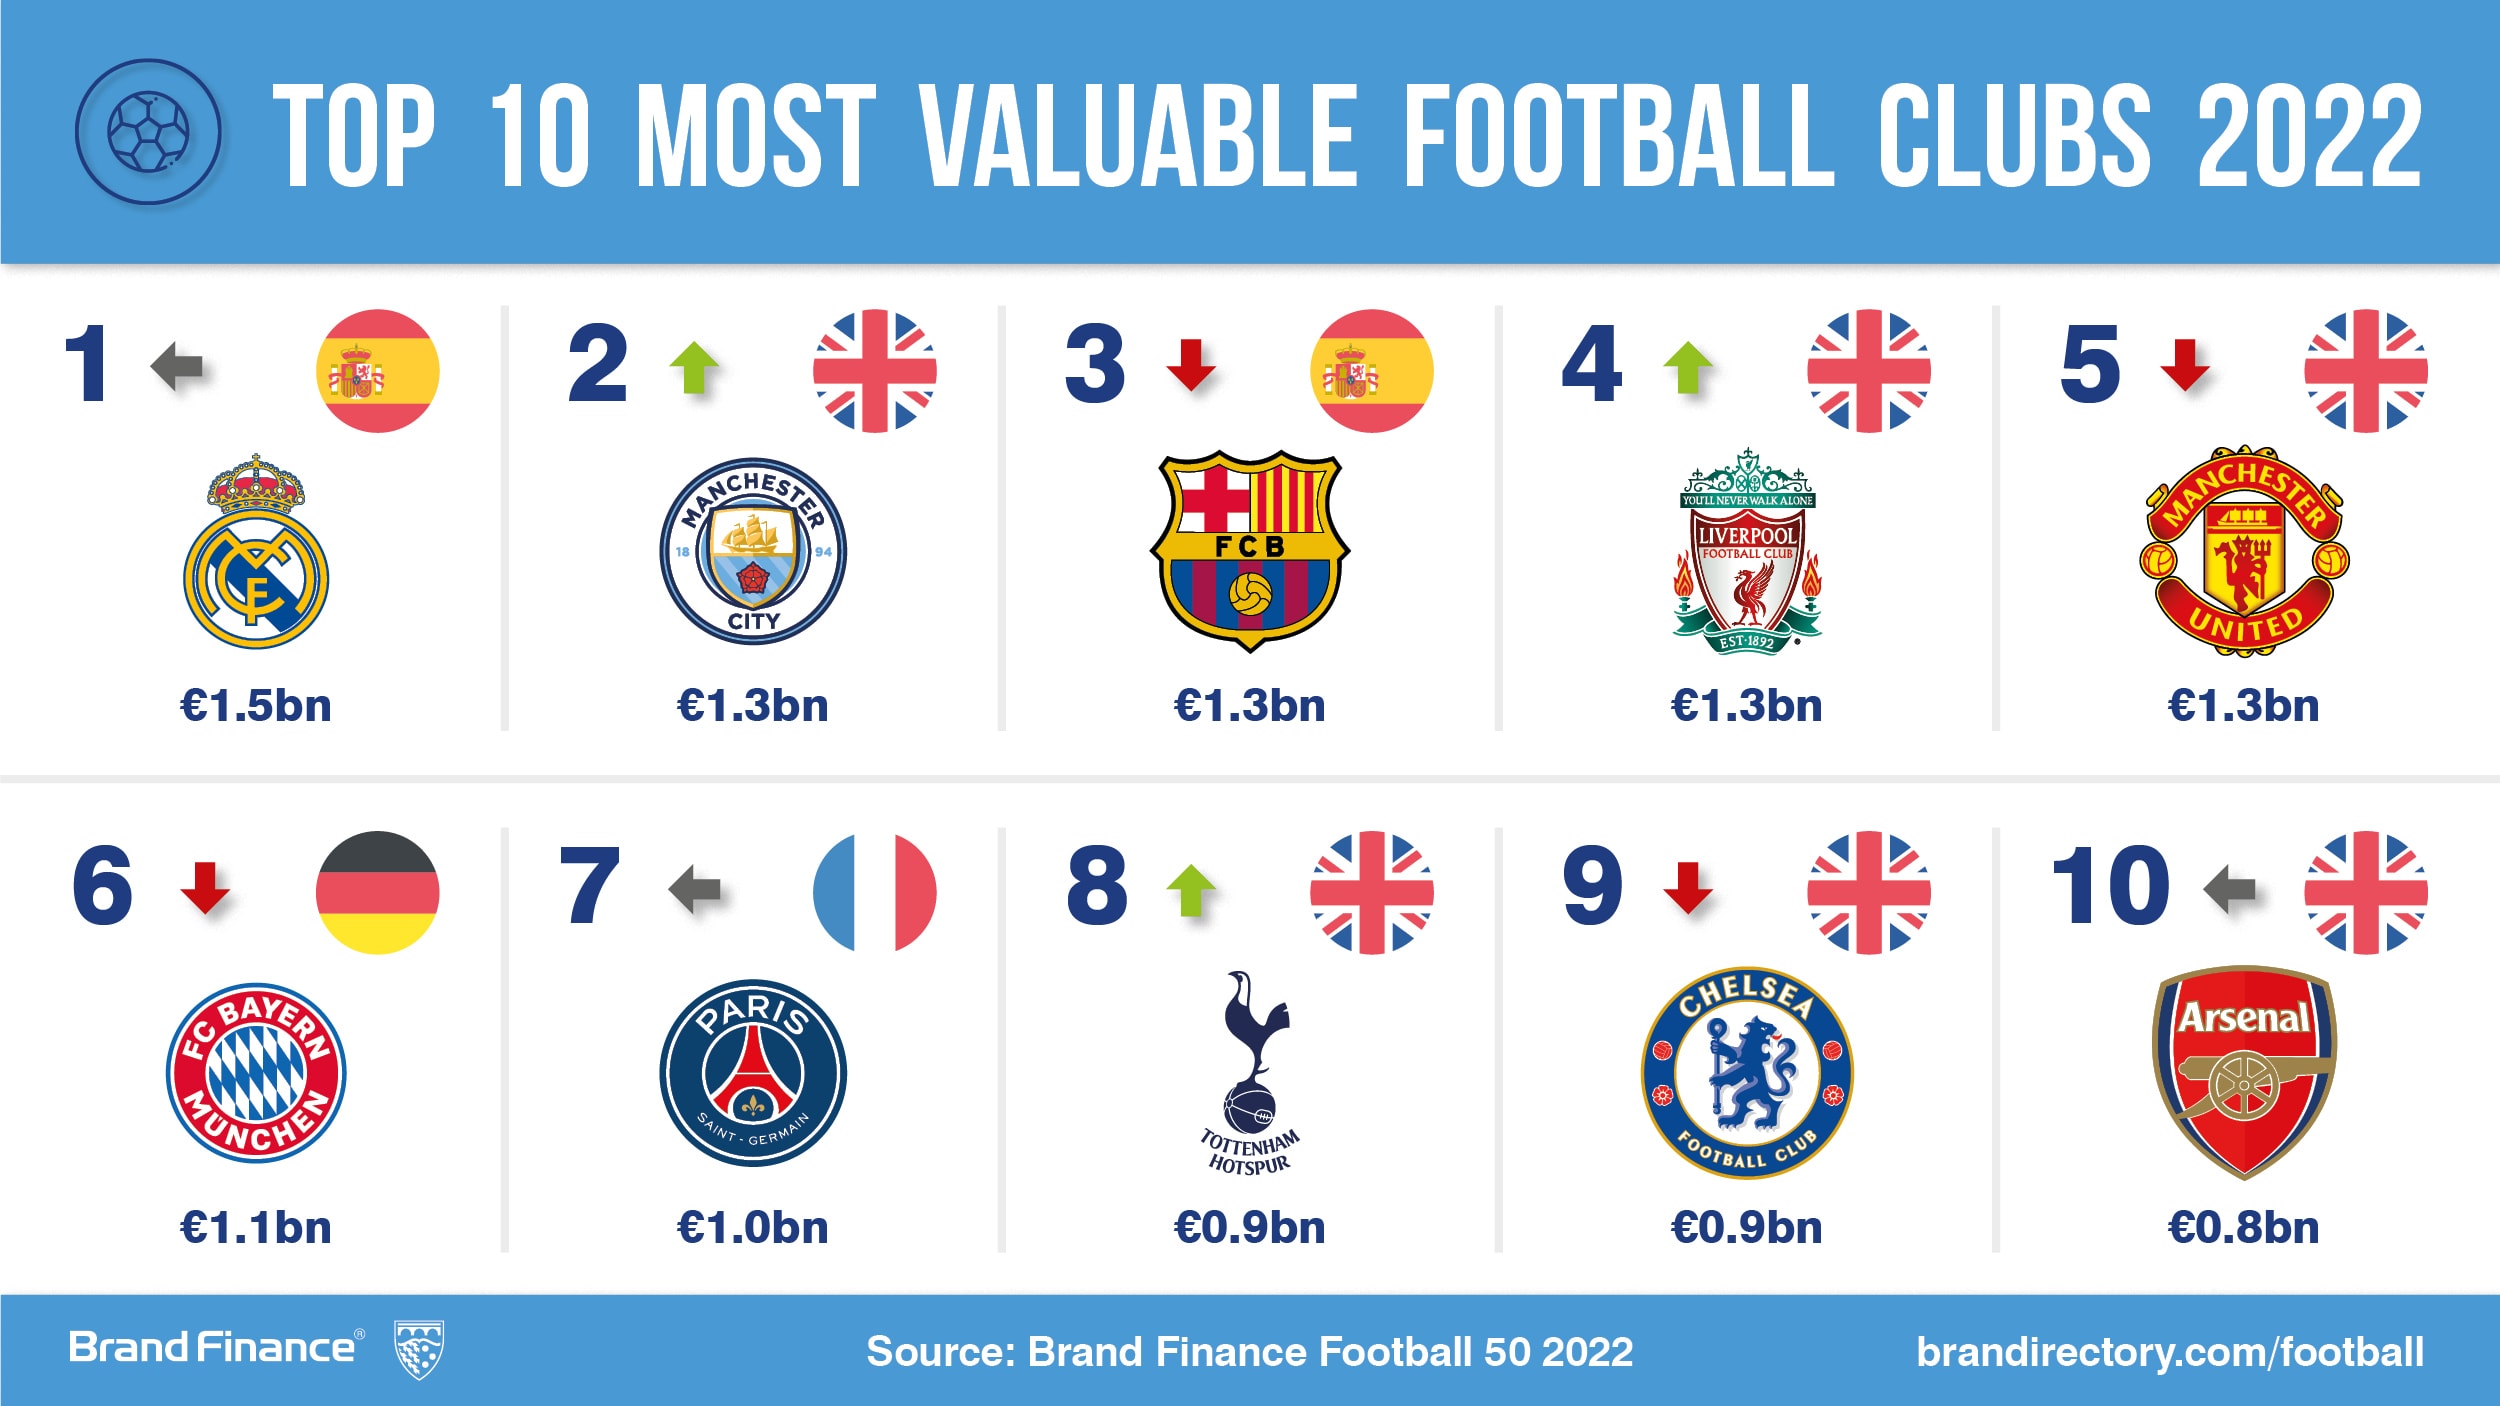 Real Madrid is world's most valuable football brand according to Brand